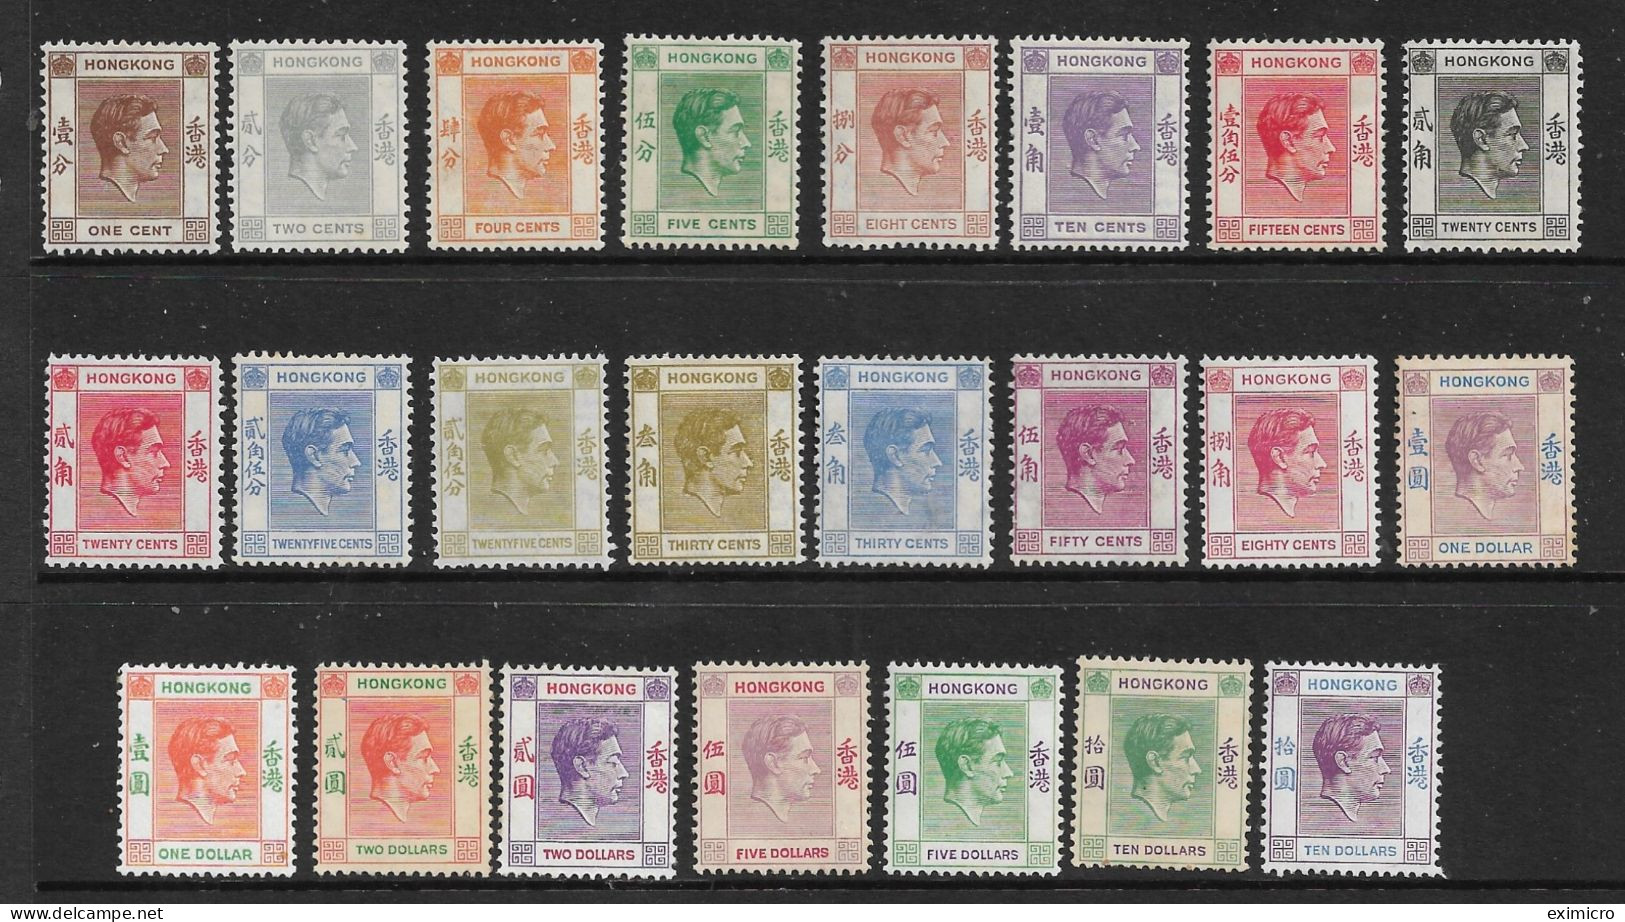 HONG KONG 1938 - 1952 SET SG 140/162 MOUNTED MINT Cat £1100 - Unused Stamps